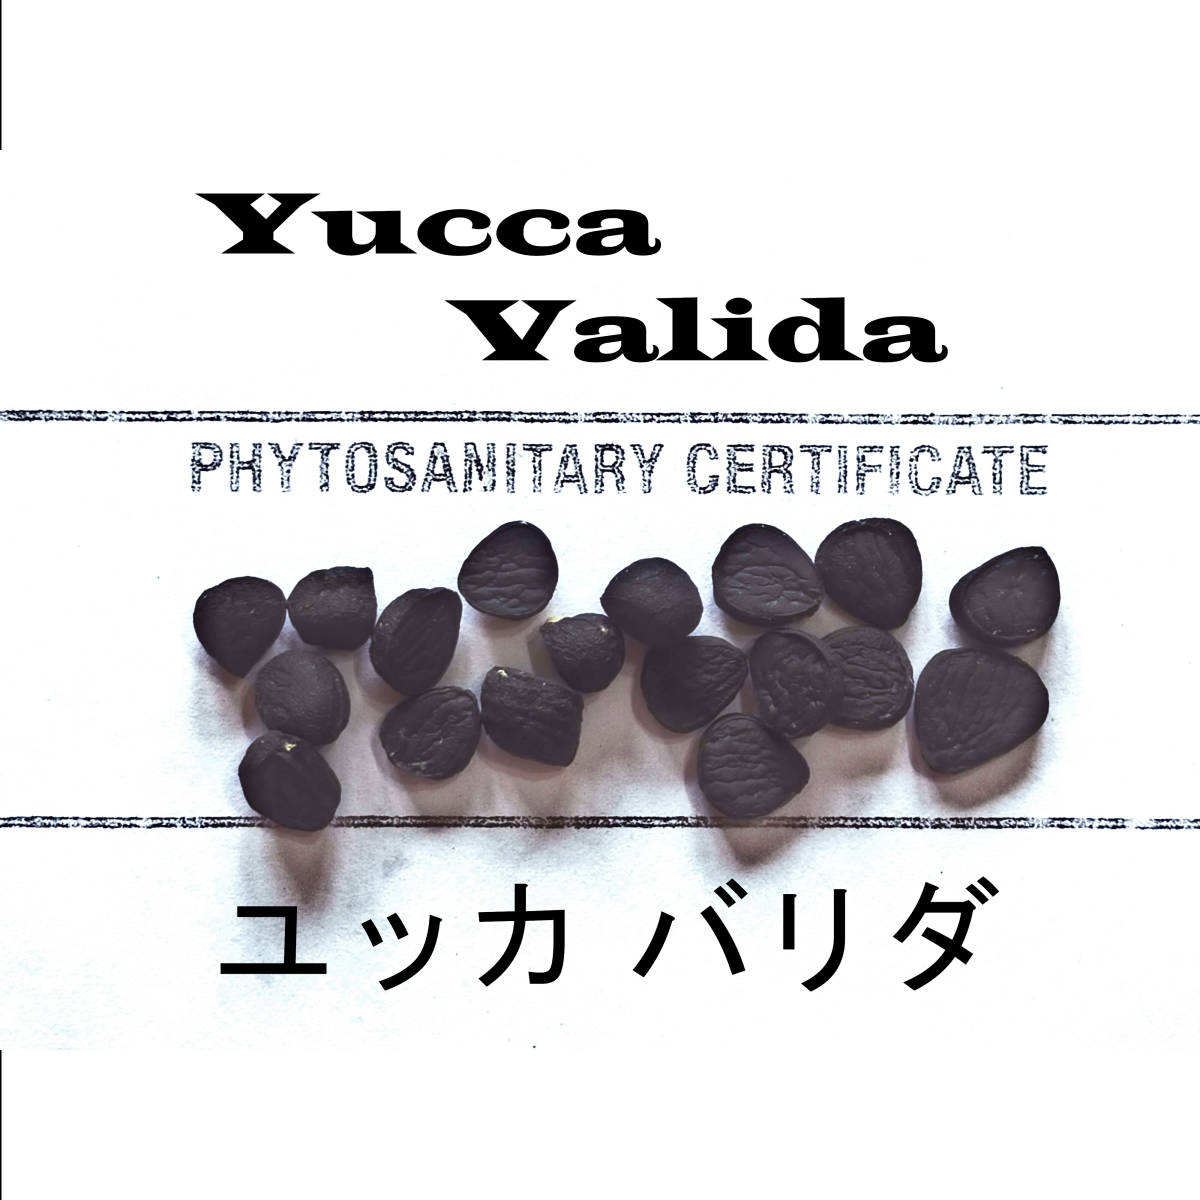 10 month arrival 5 bead + yucca burr da seeds kind certificate equipped 